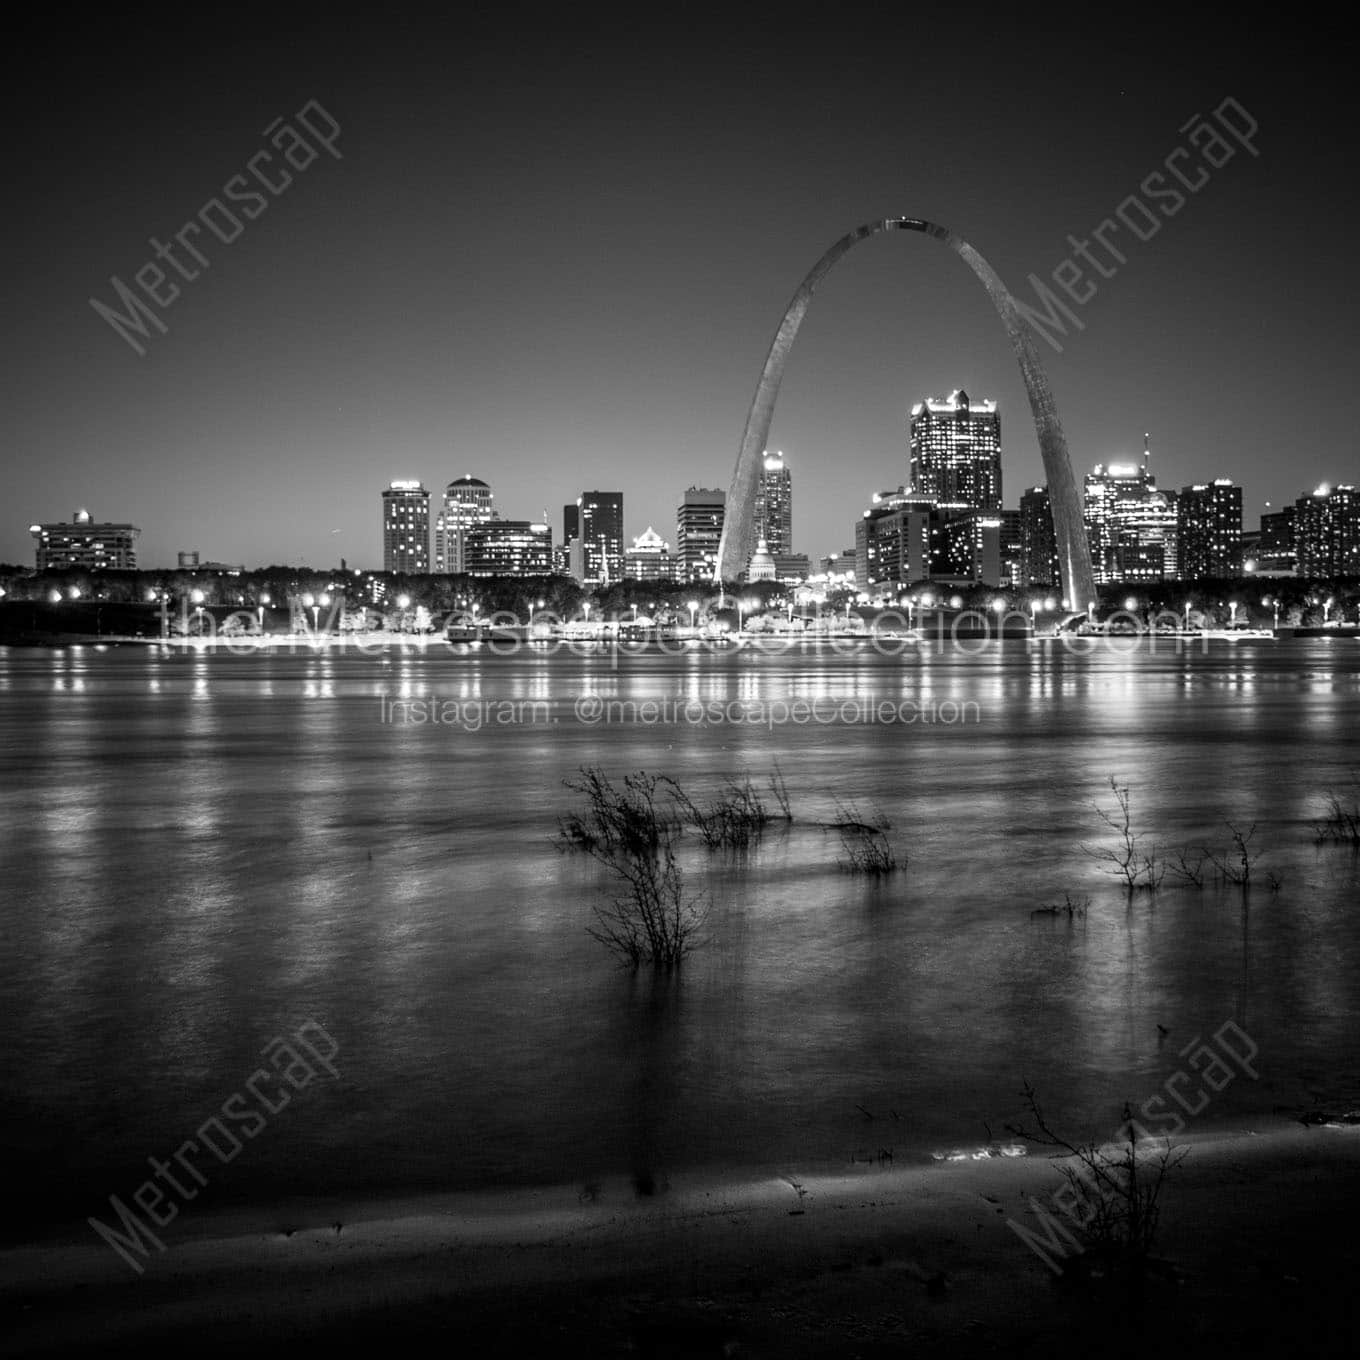 gateway arch over st louis skyline at night Black & White Wall Art